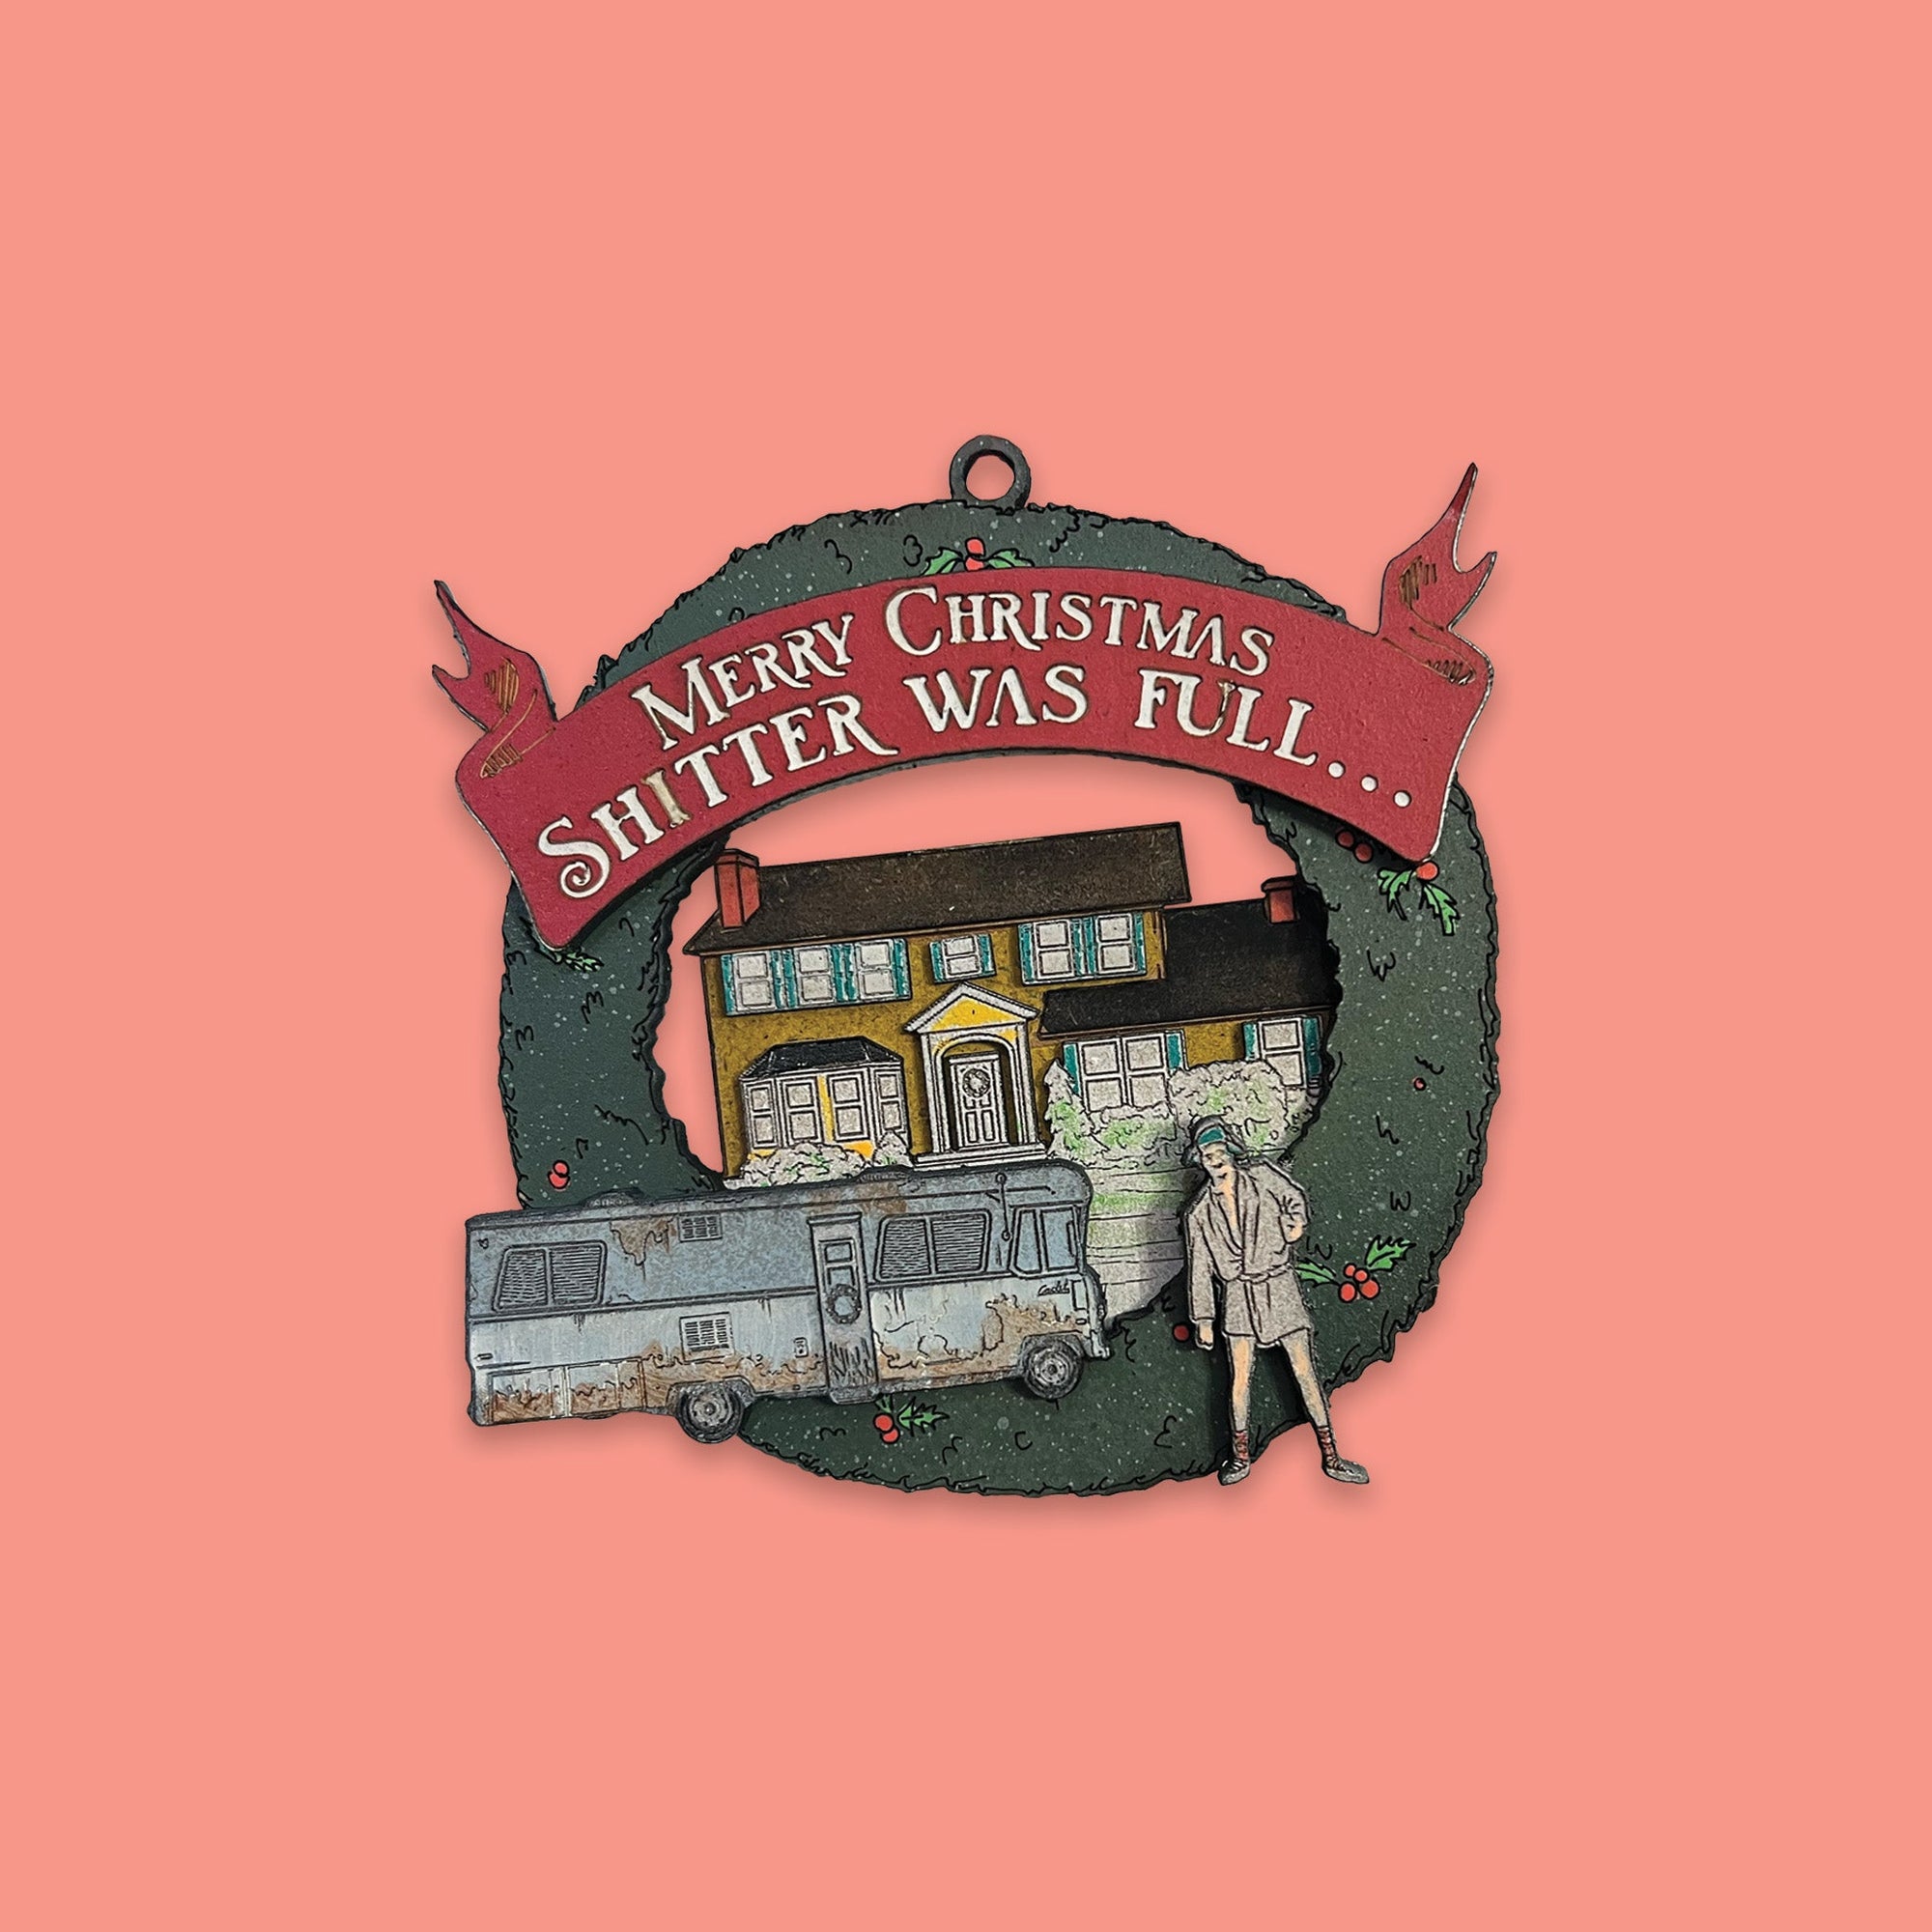 On a coral pink background sits a Christmas Vacation inspired ornament. It is of Cousin Eddie with his motorhome in front of the Griswold house. There is a red banner at the top and it says in white "MERRY CHRISTMAS SHITTER WAS FULL..."